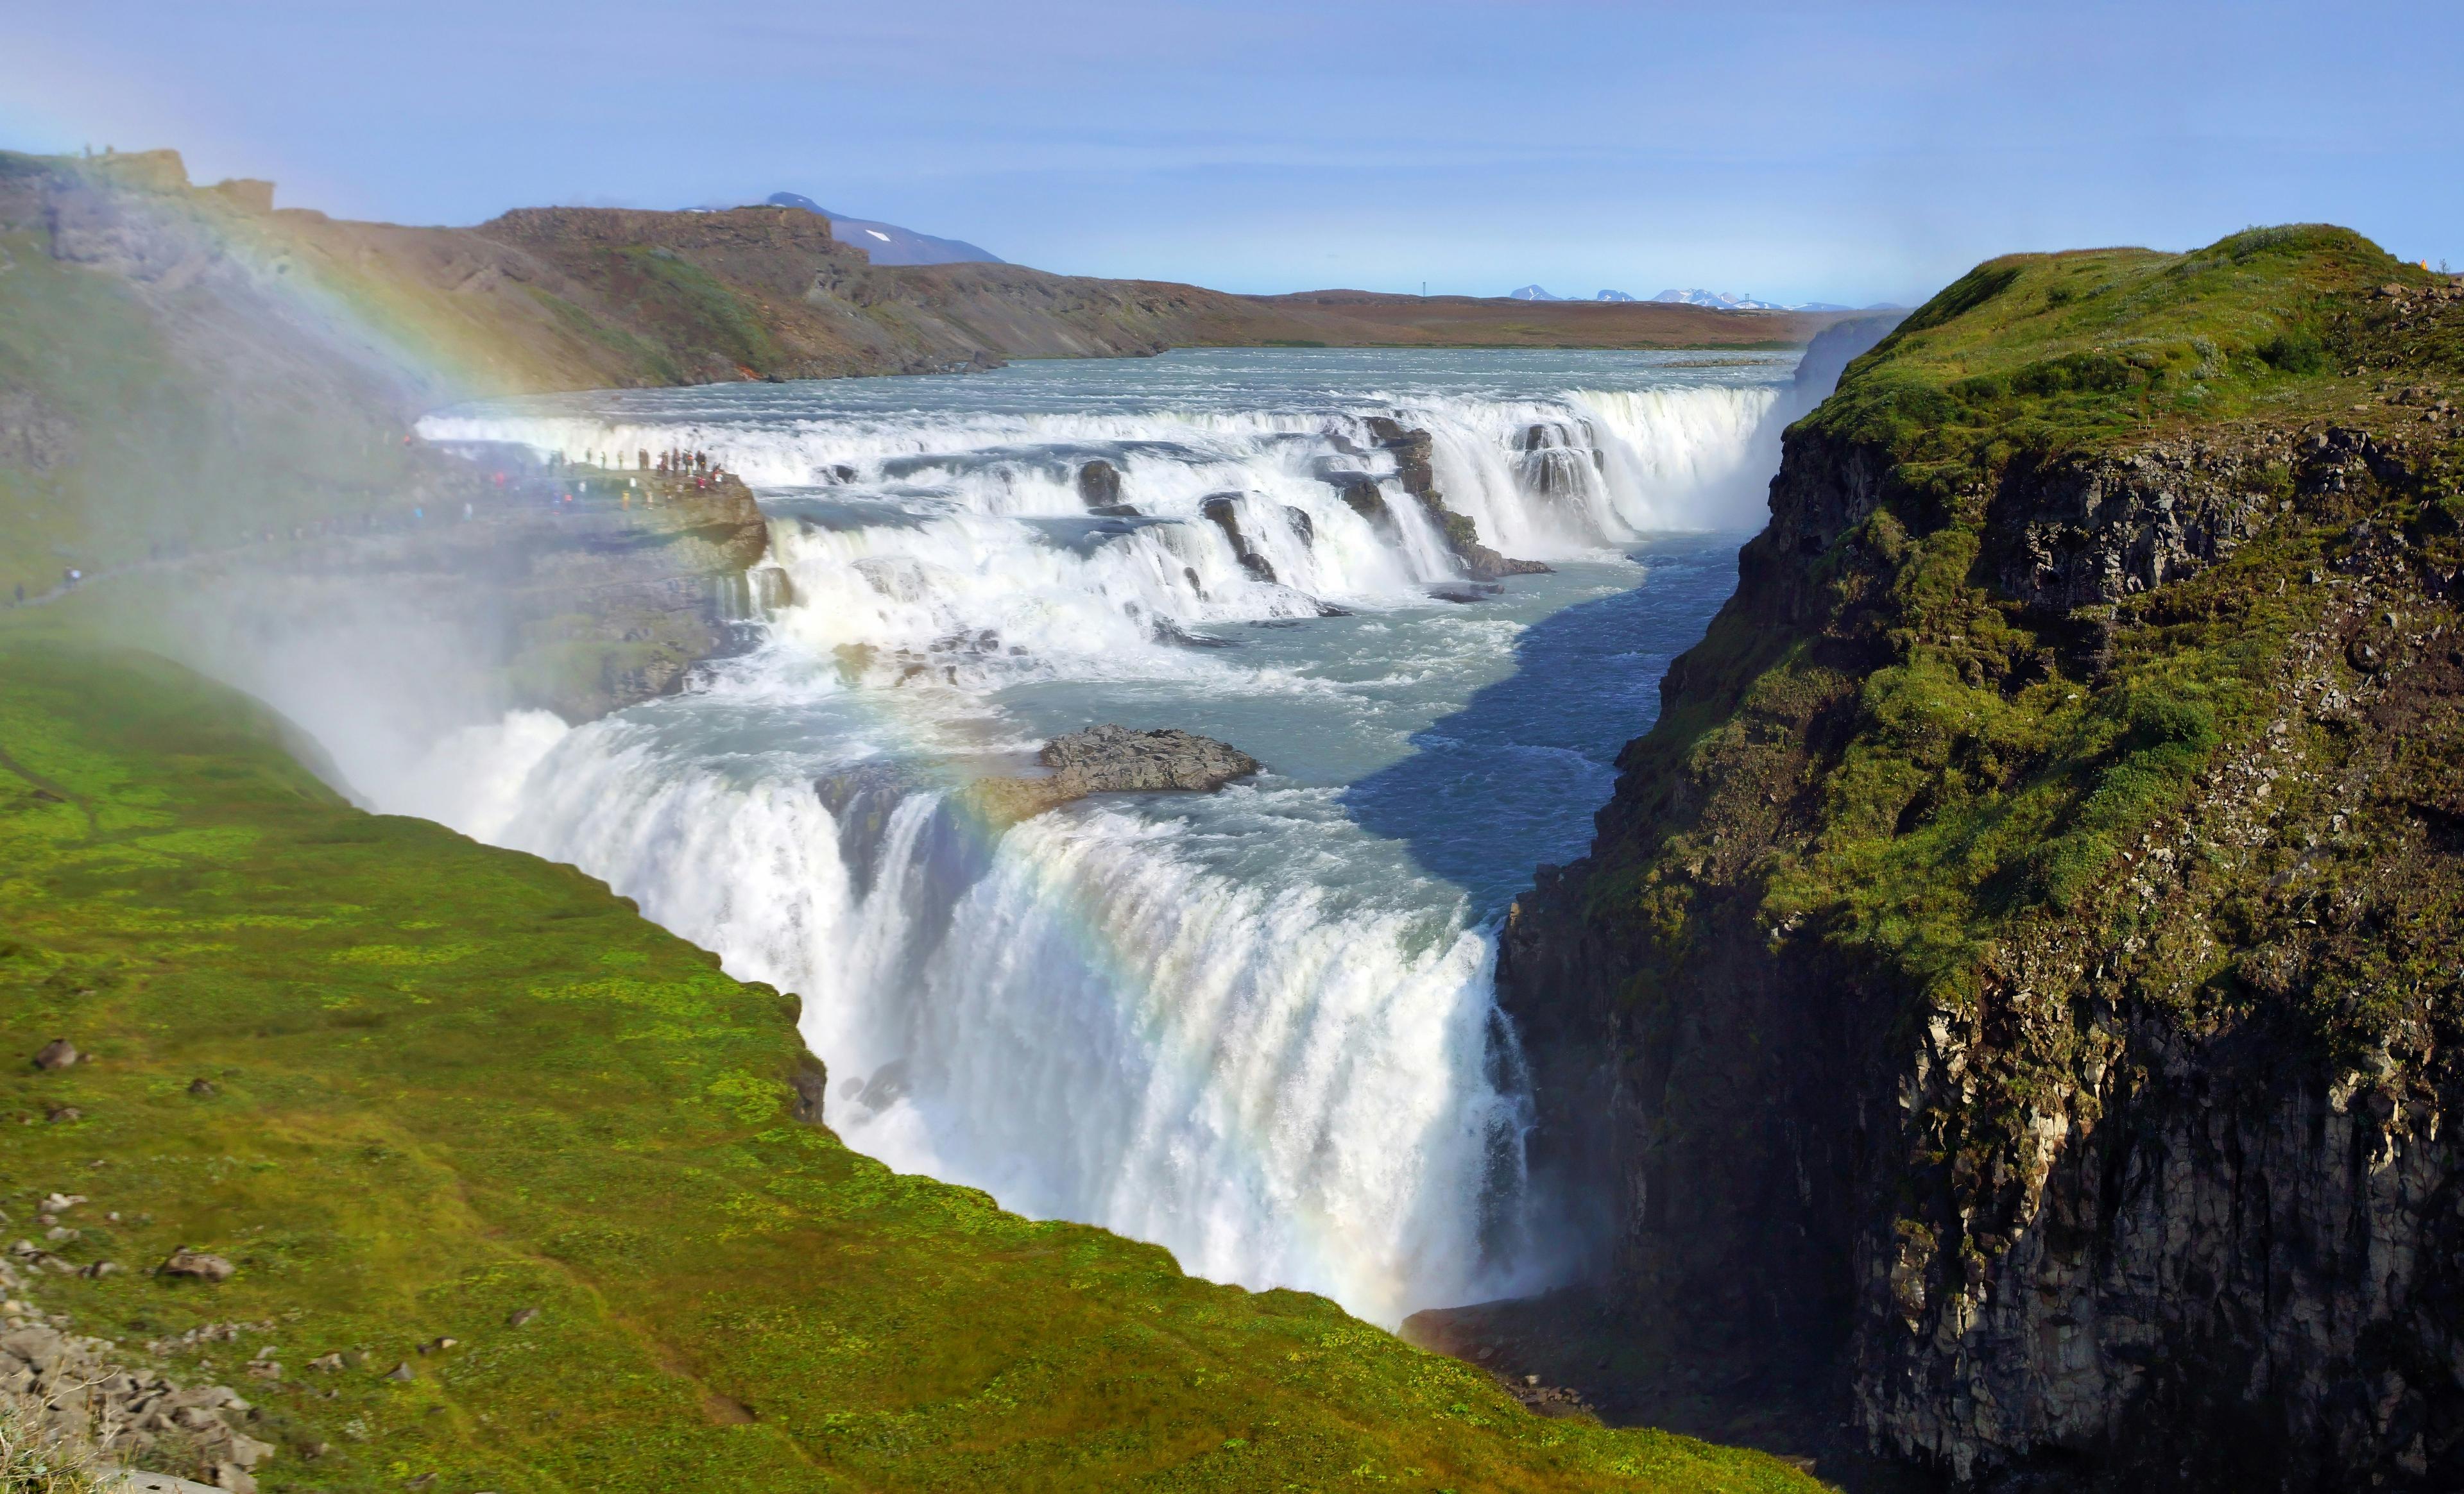 Gullfoss waterfall in Iceland, with lush green surroundings and a vibrant rainbow arching through the mist.